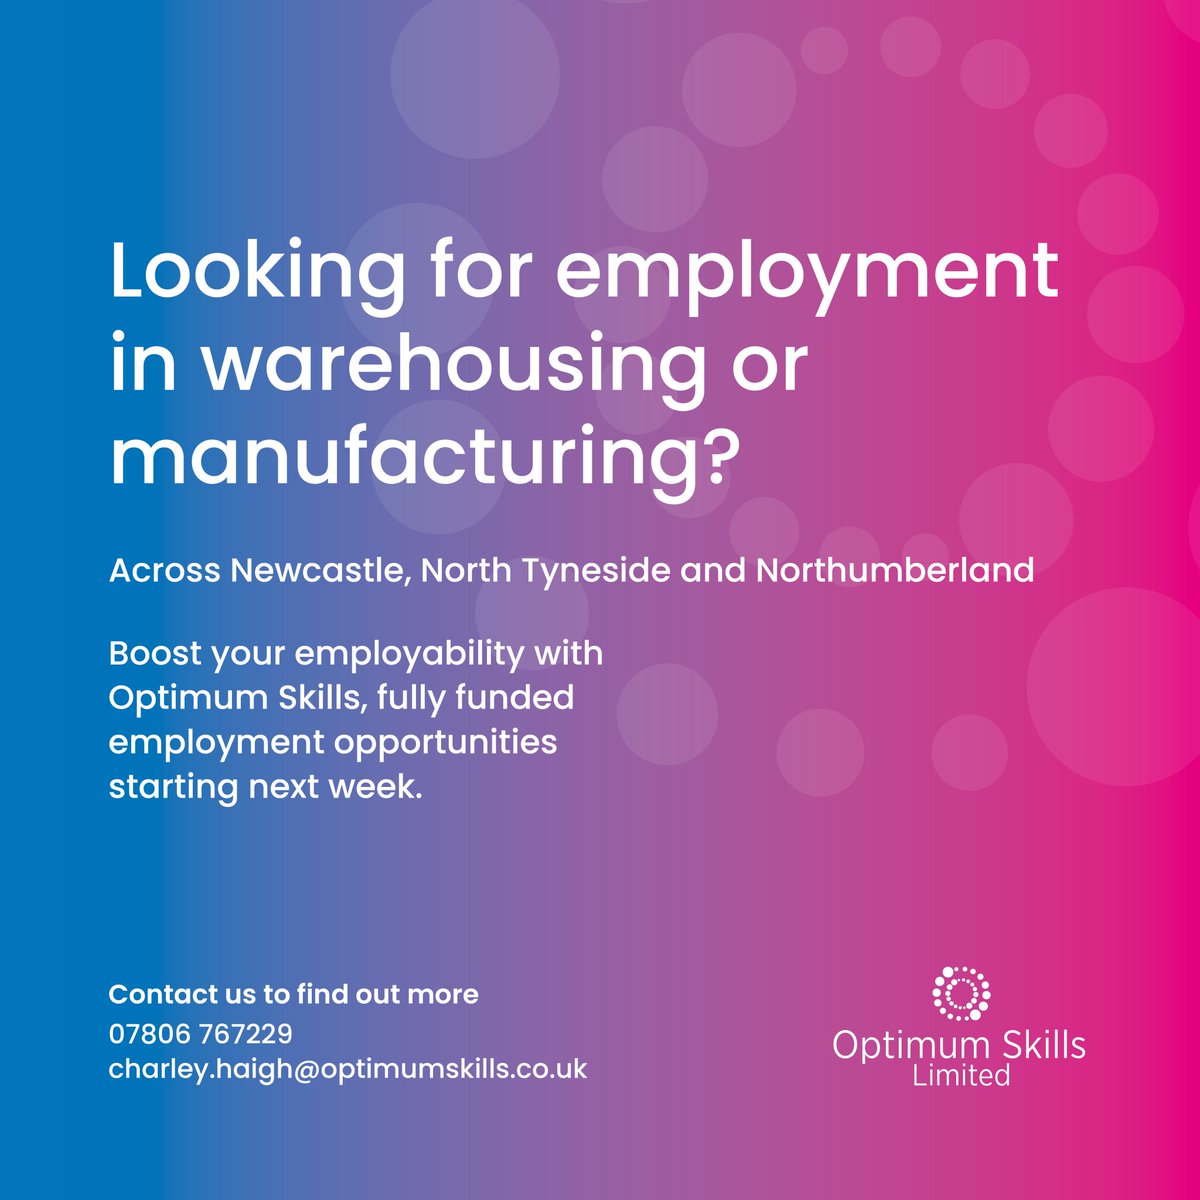 Boost your employability with Optimum Skills. We have opportunities across Newcastle, North Tyneside and Northumberland starting next week! 

For more information about this opportunity contact Charley on 07806 767229 or at charley.haigh@optimumskills.co.uk

#OptimisingPotential https://t.co/8Be7Jaa2iu